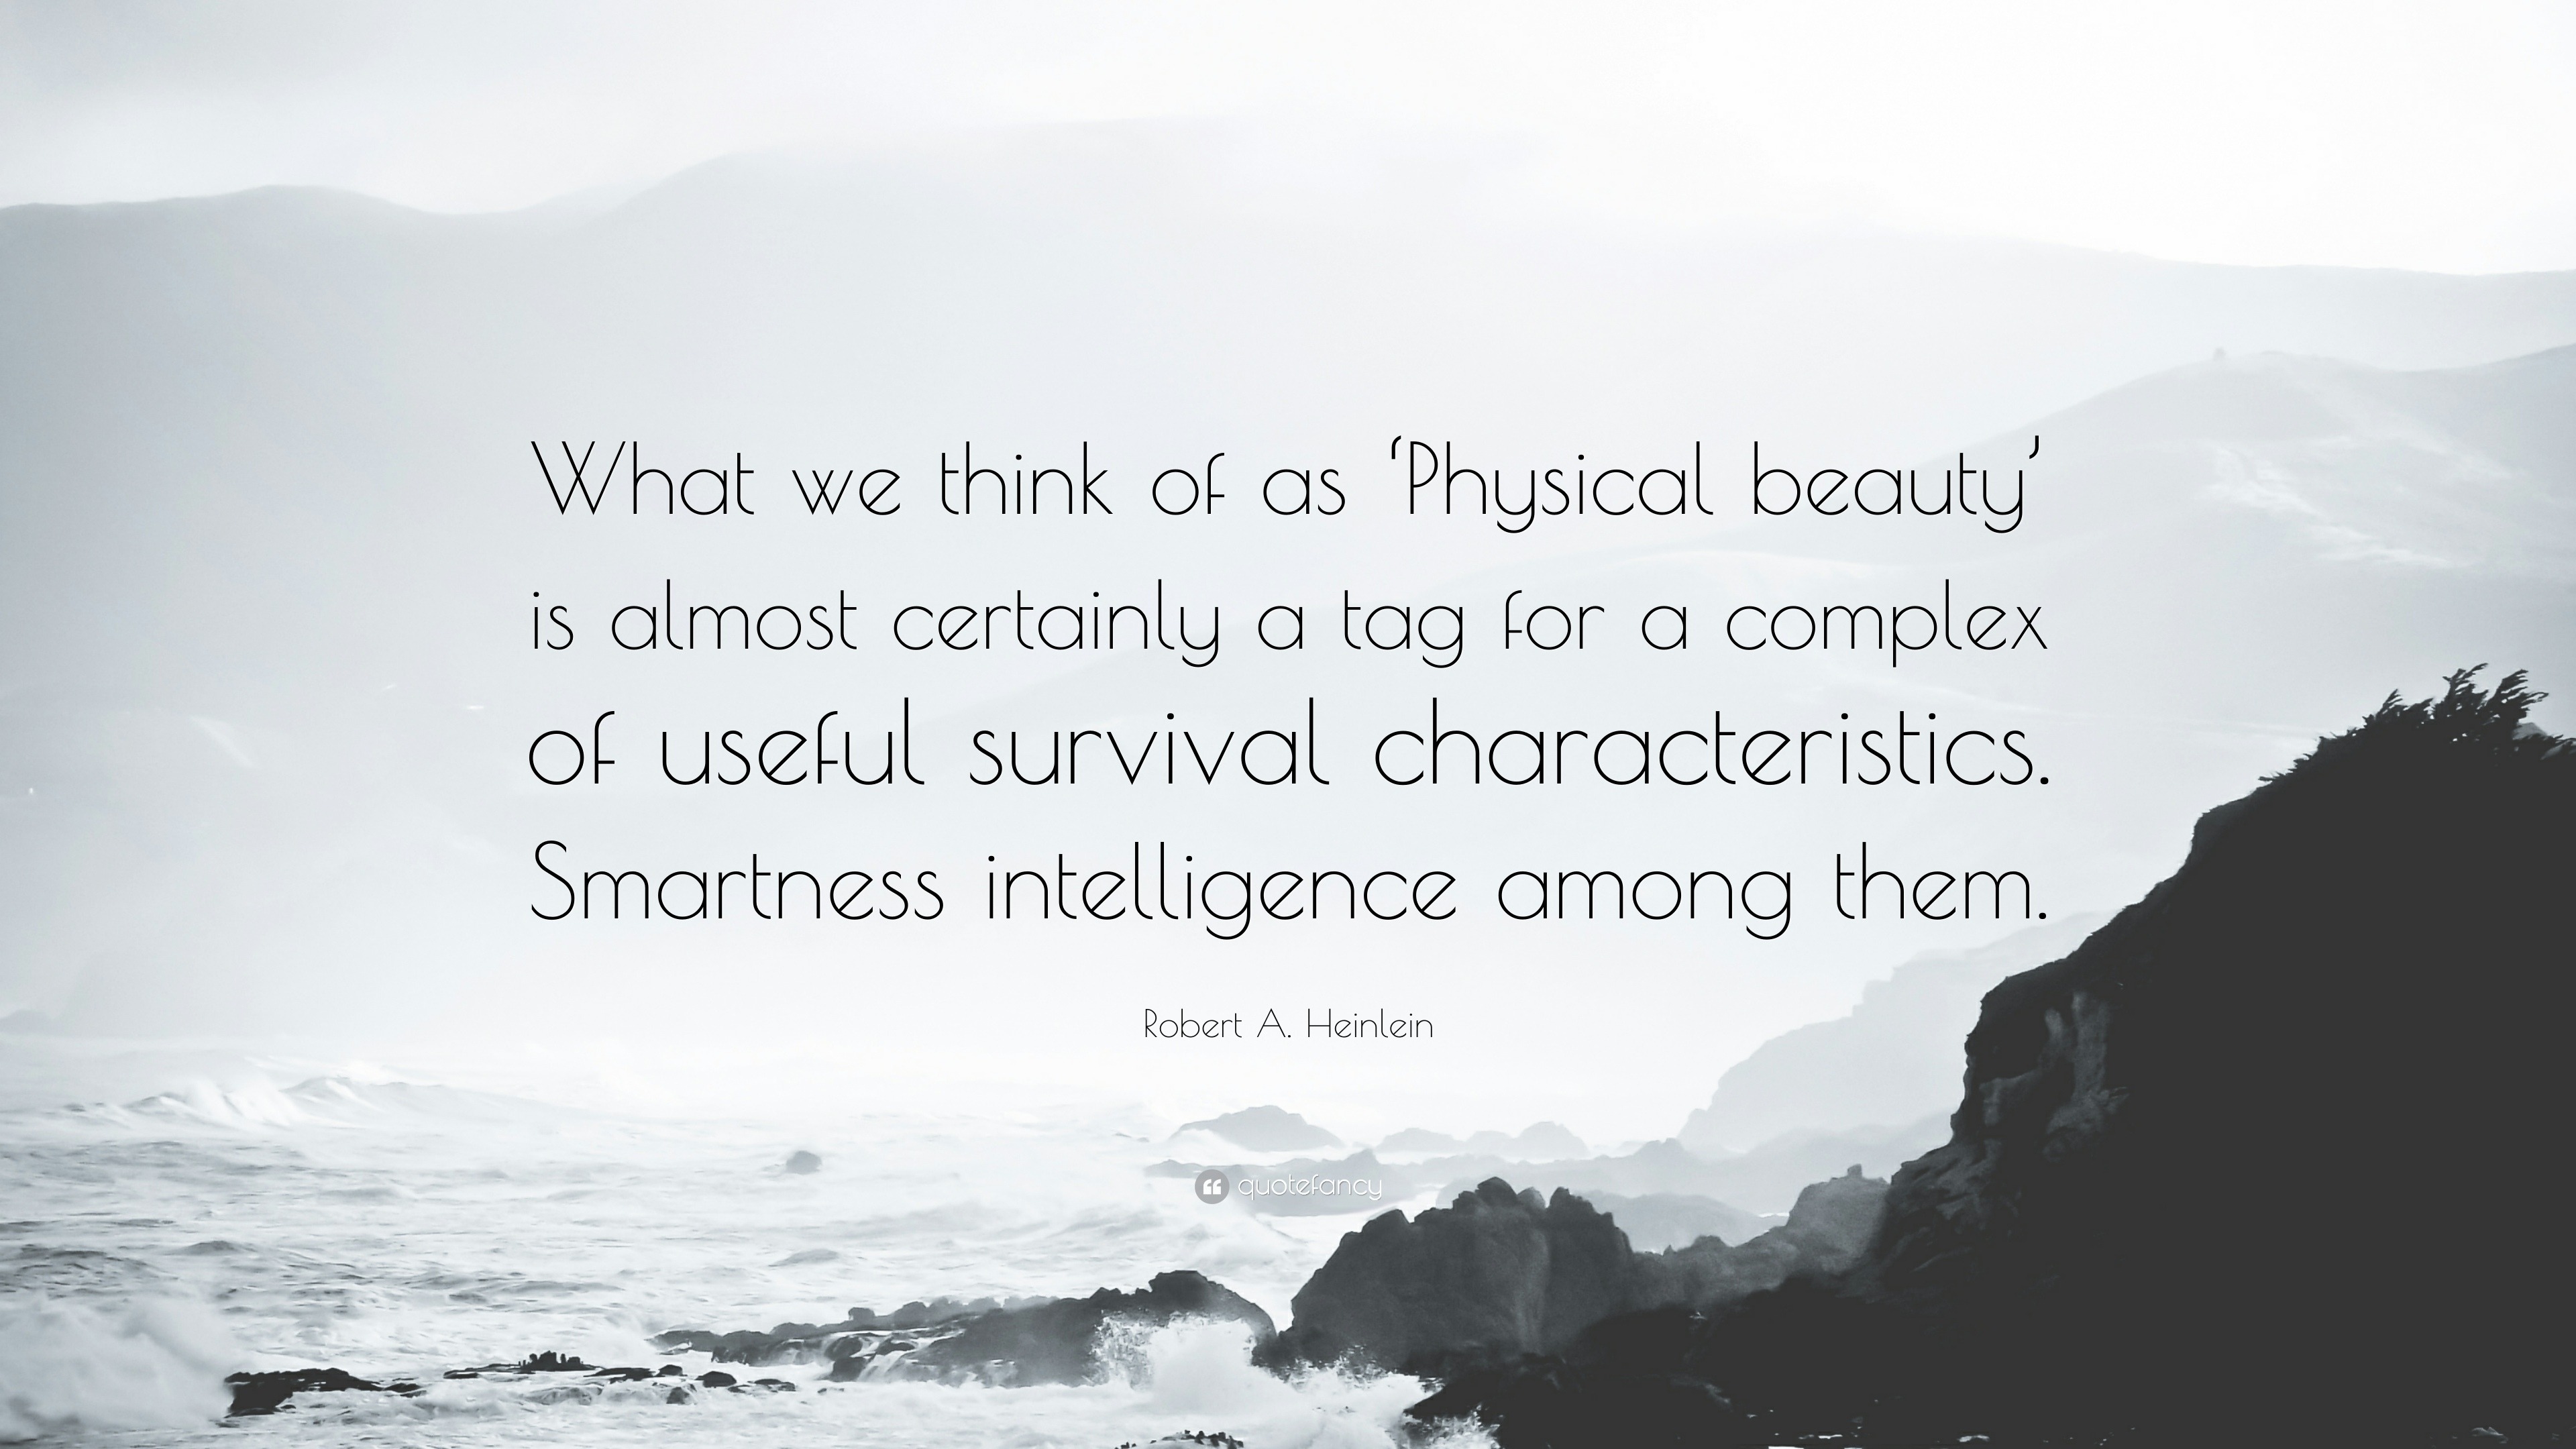 Robert A. Heinlein Quote: “What we think of as 'Physical beauty' is almost  certainly a tag for a complex of useful survival characteristics. Smartn...”